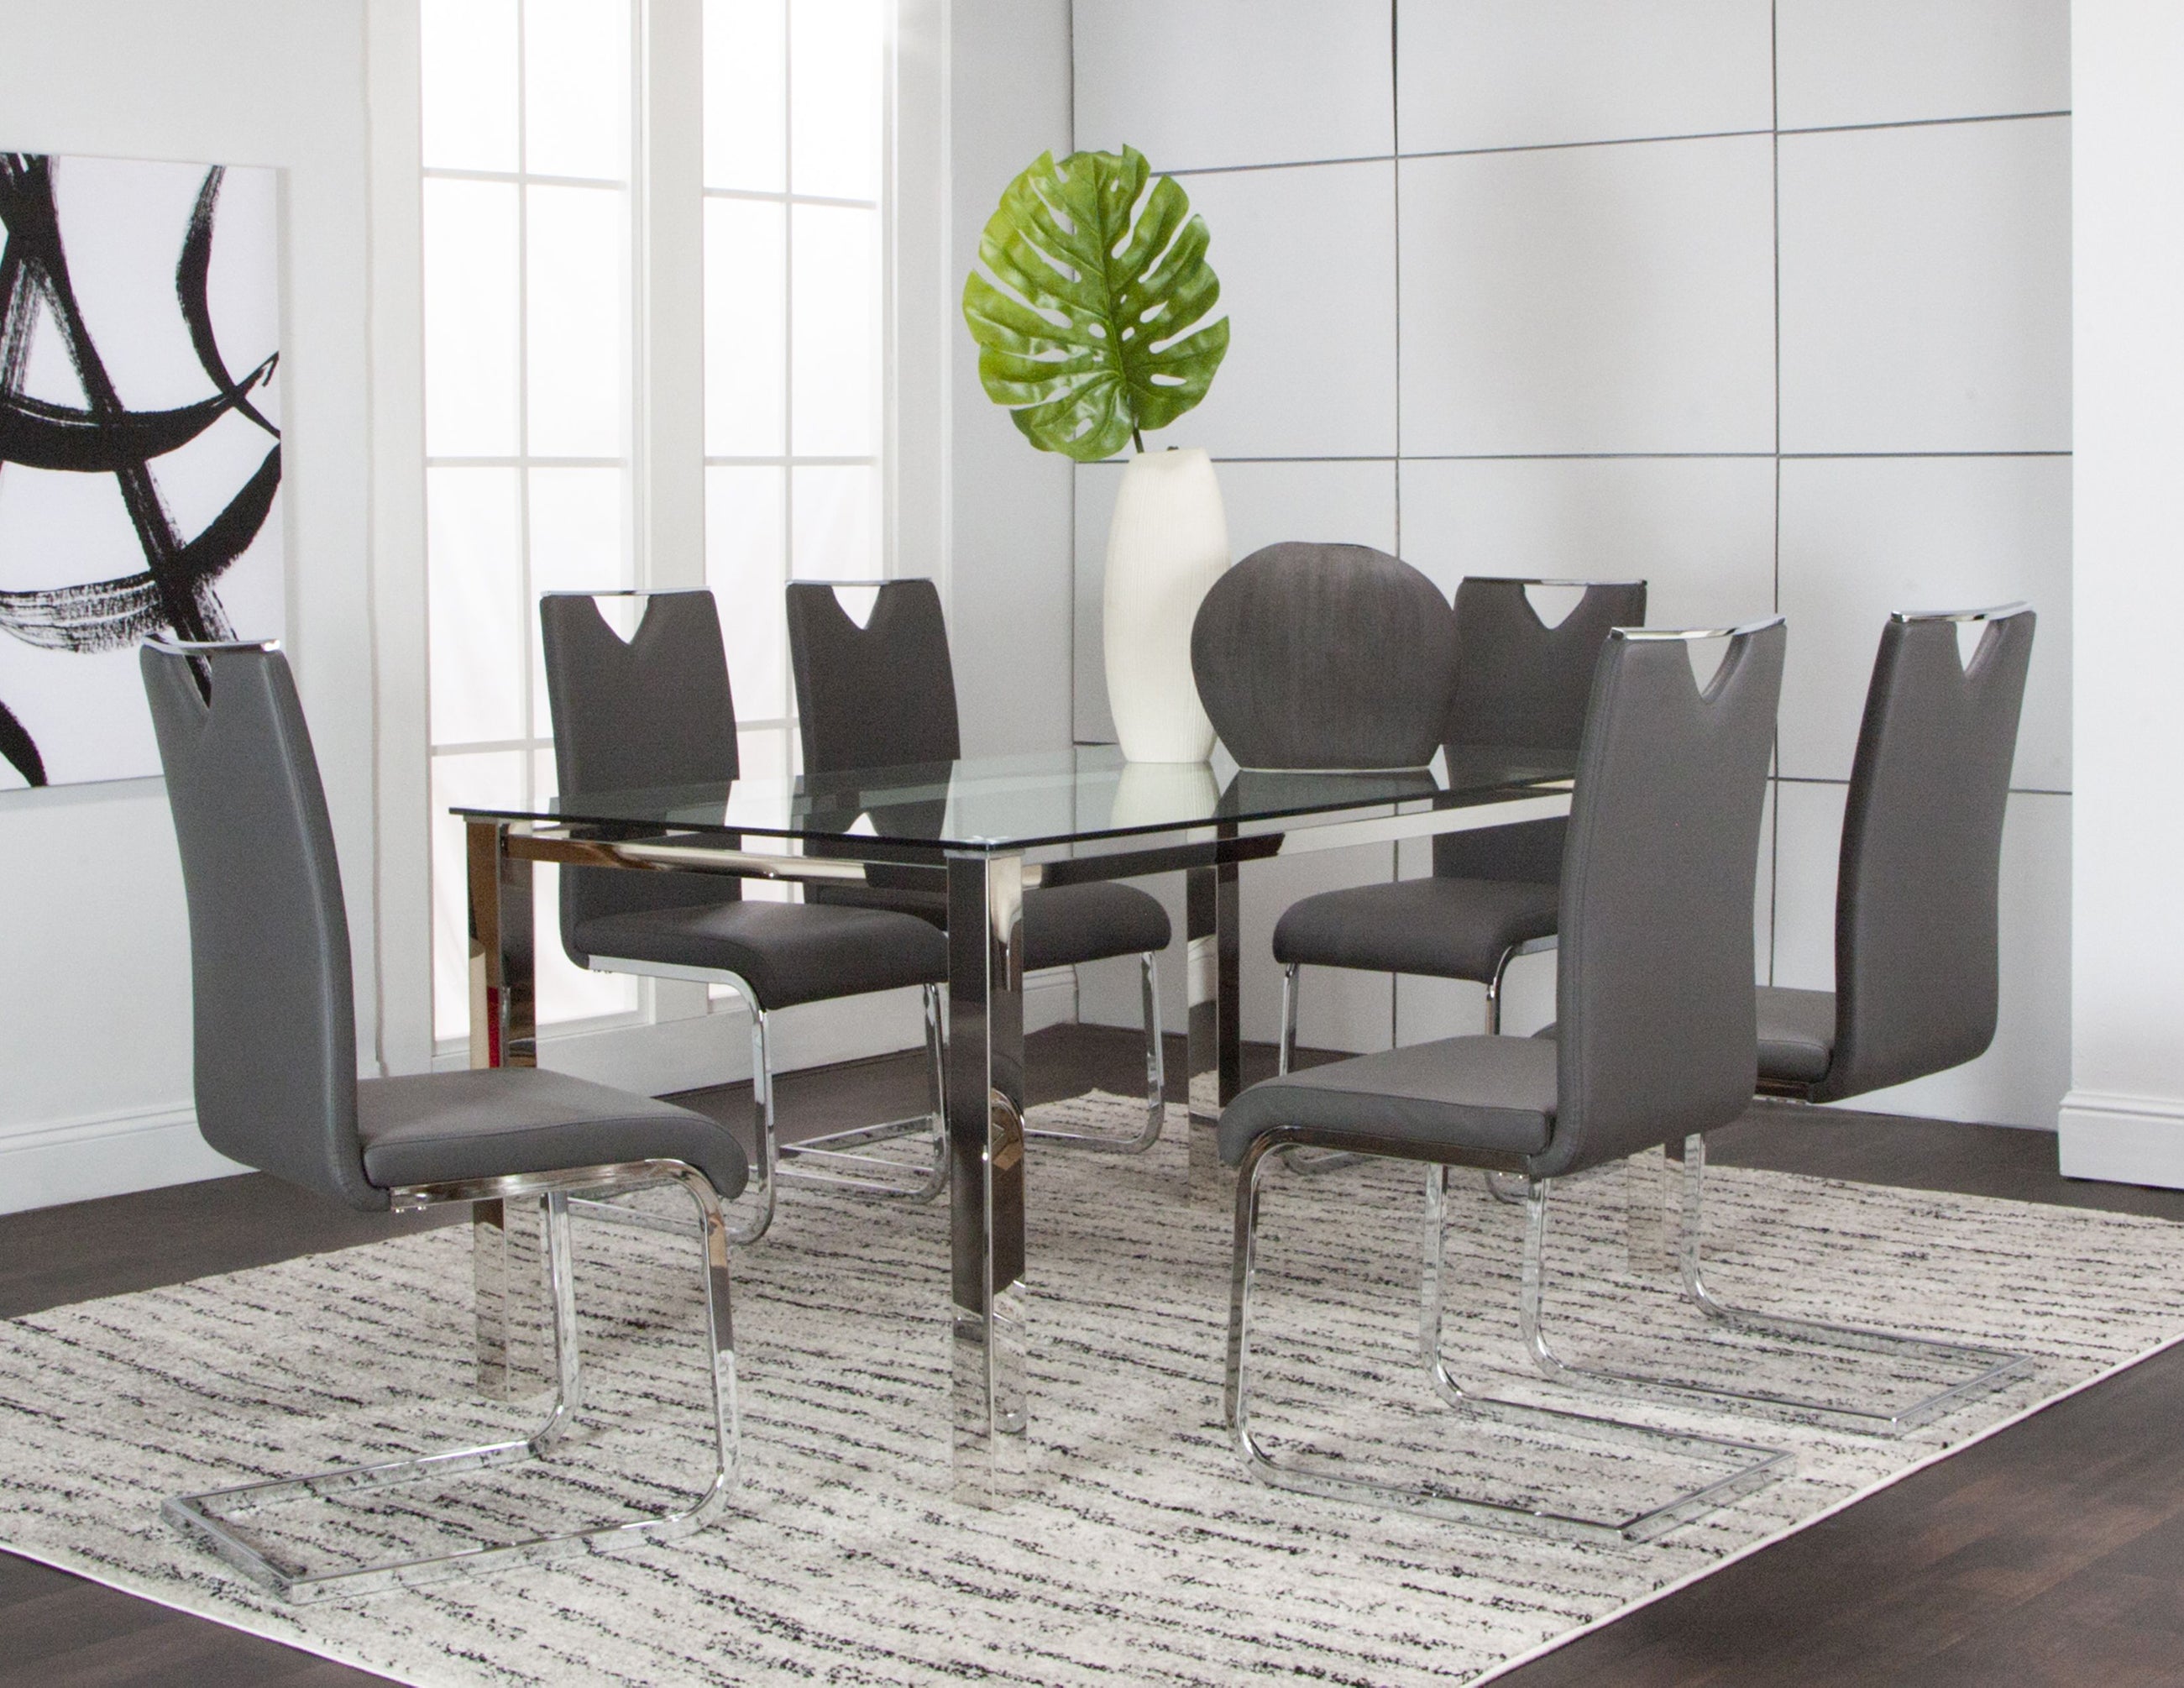 Skyline 5 Piece Dining Set With Grey Chairs Kanes Furniture